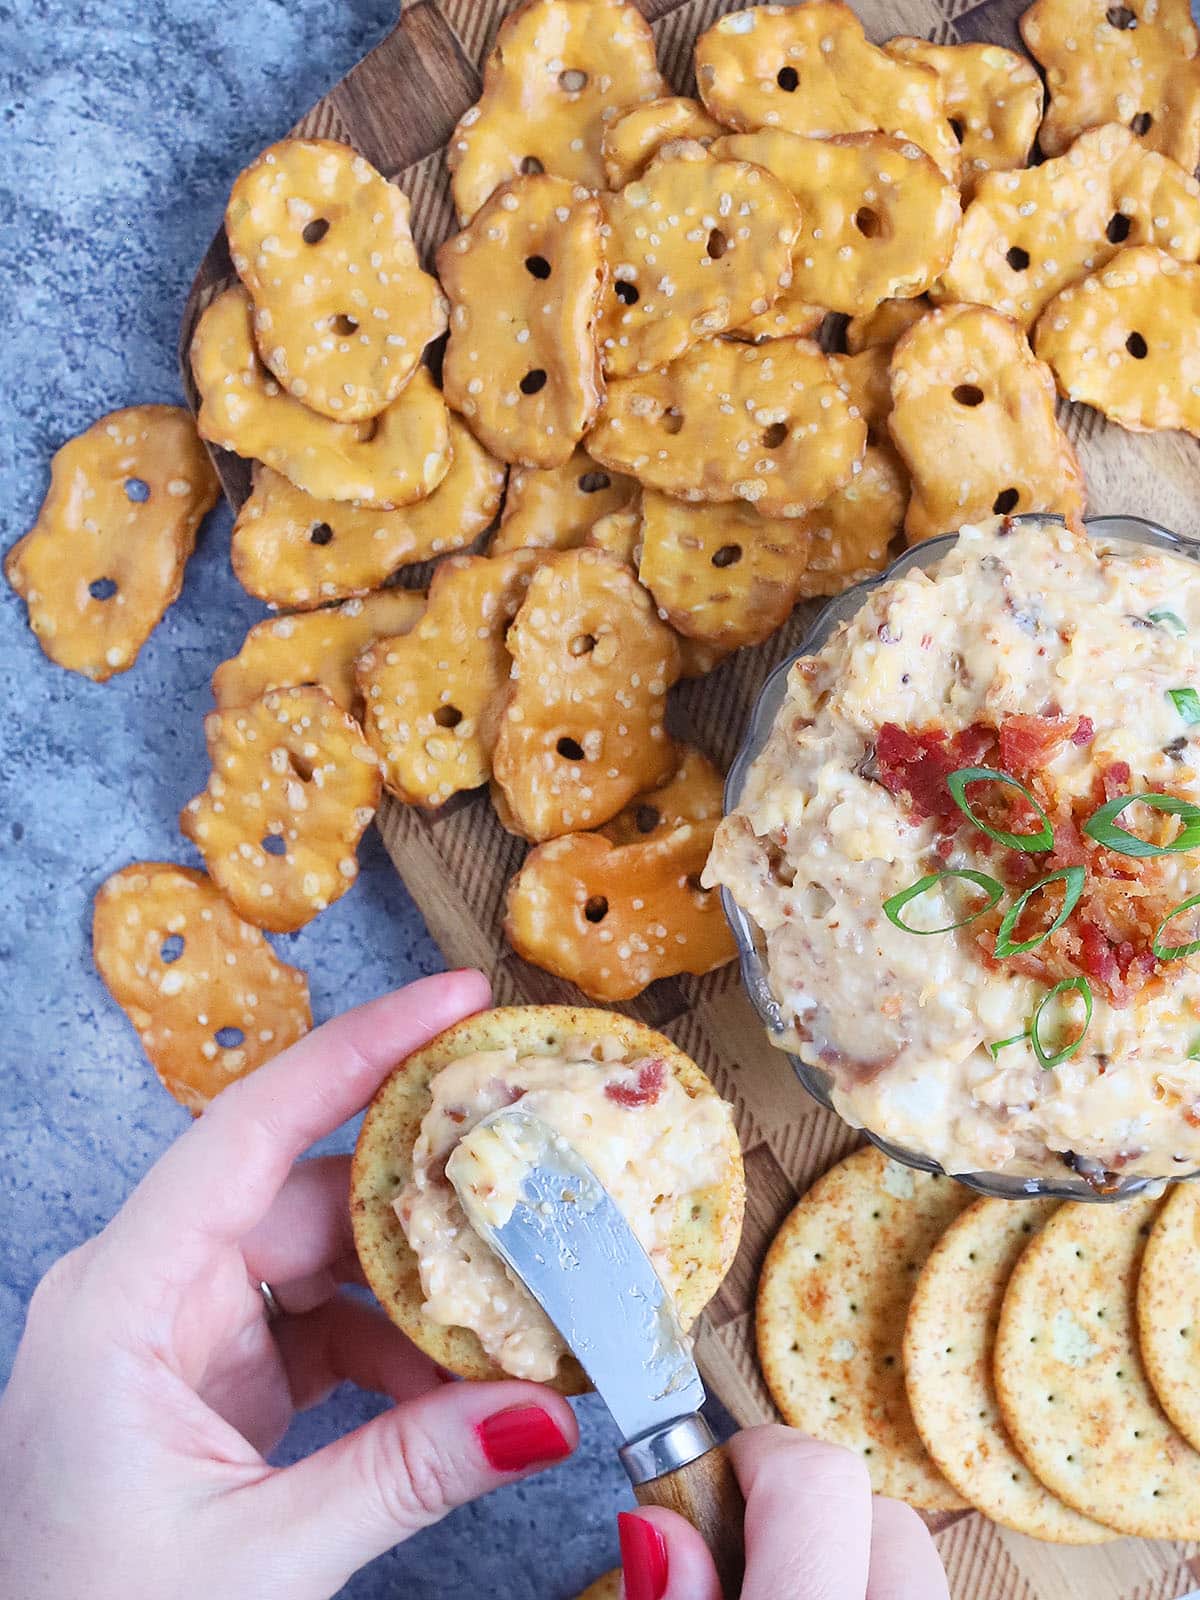 Pair of hands spreading spicy pimento cheese onto a cracker.